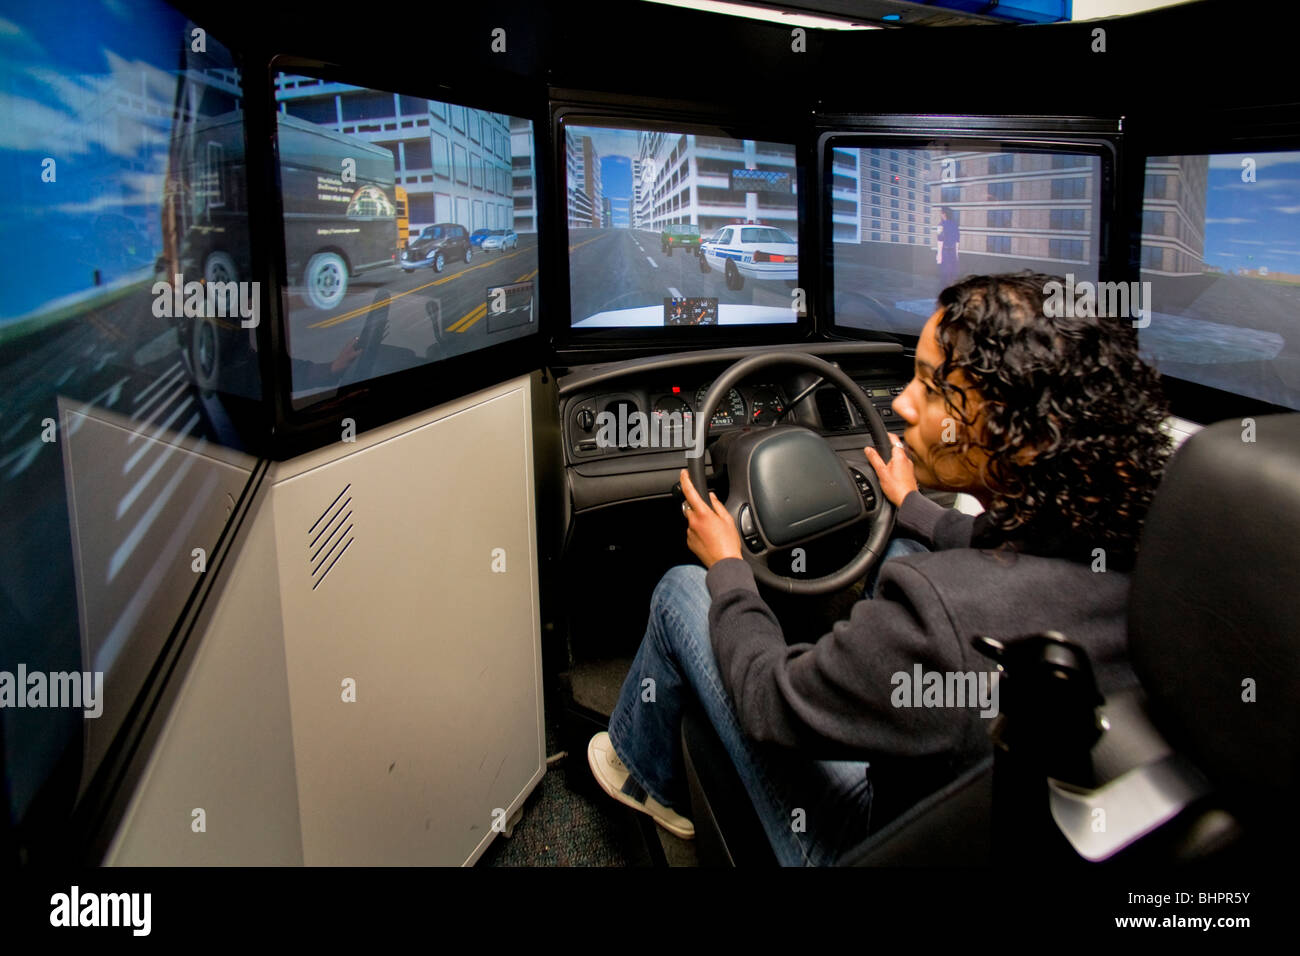 A woman police officer practices high speed driving skills in a patrol car simulator with a real steering wheel and seat. Stock Photo